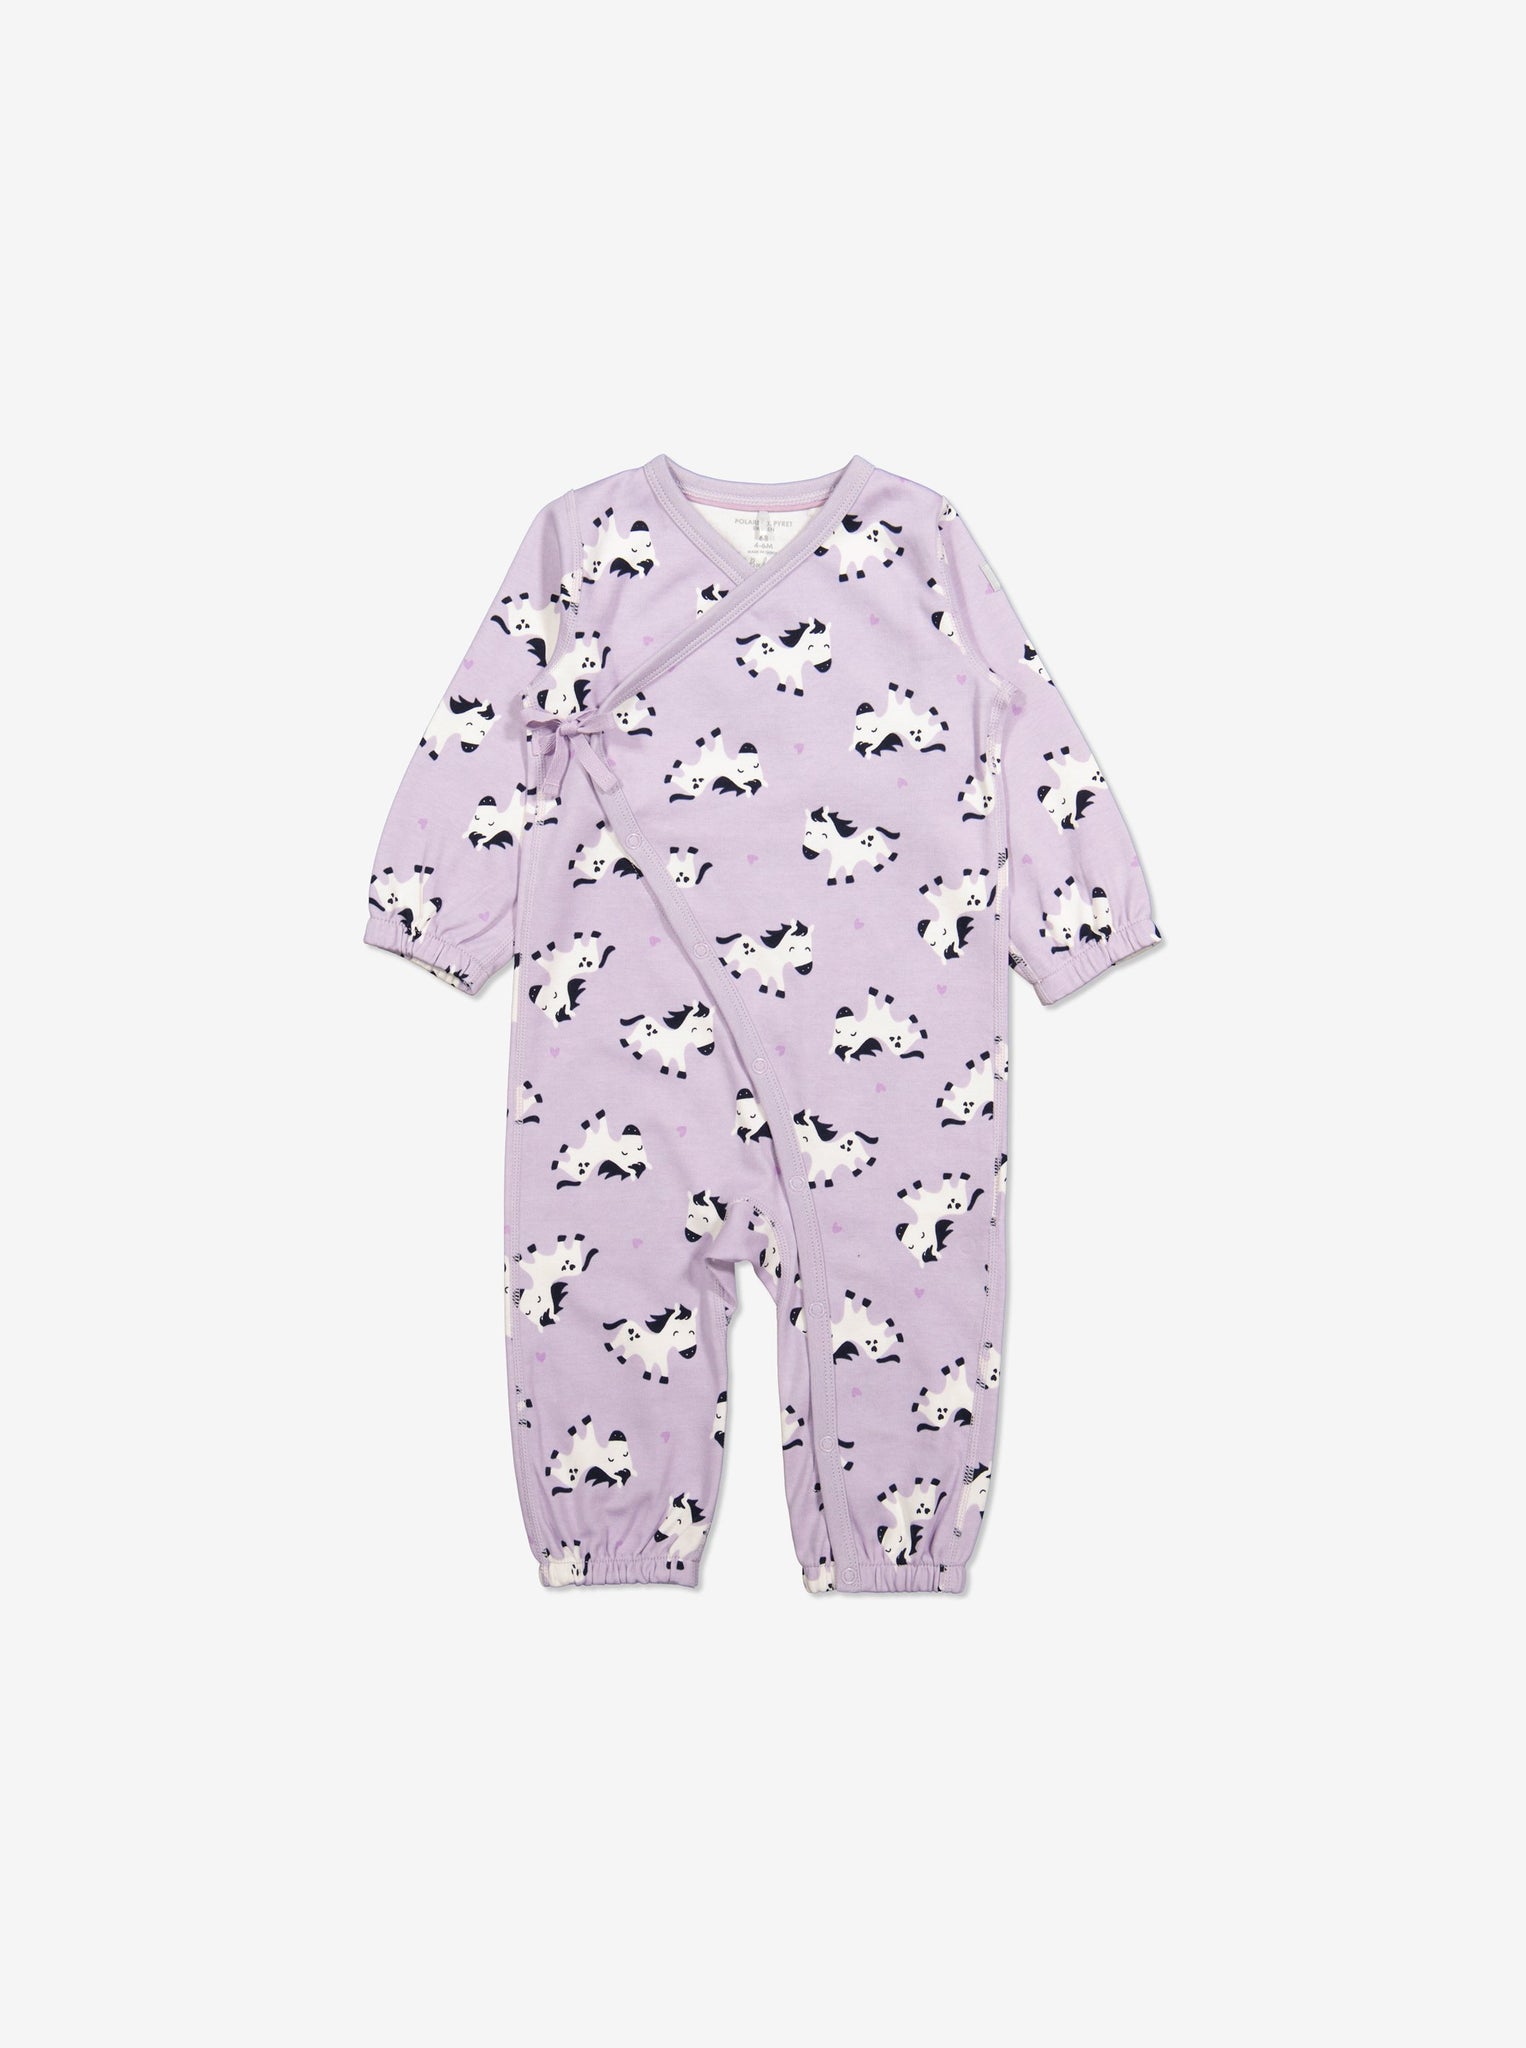  Organic Pink Horse Print Baby Romper from Polarn O. Pyret Kidswear. Made with 100% organic cotton.